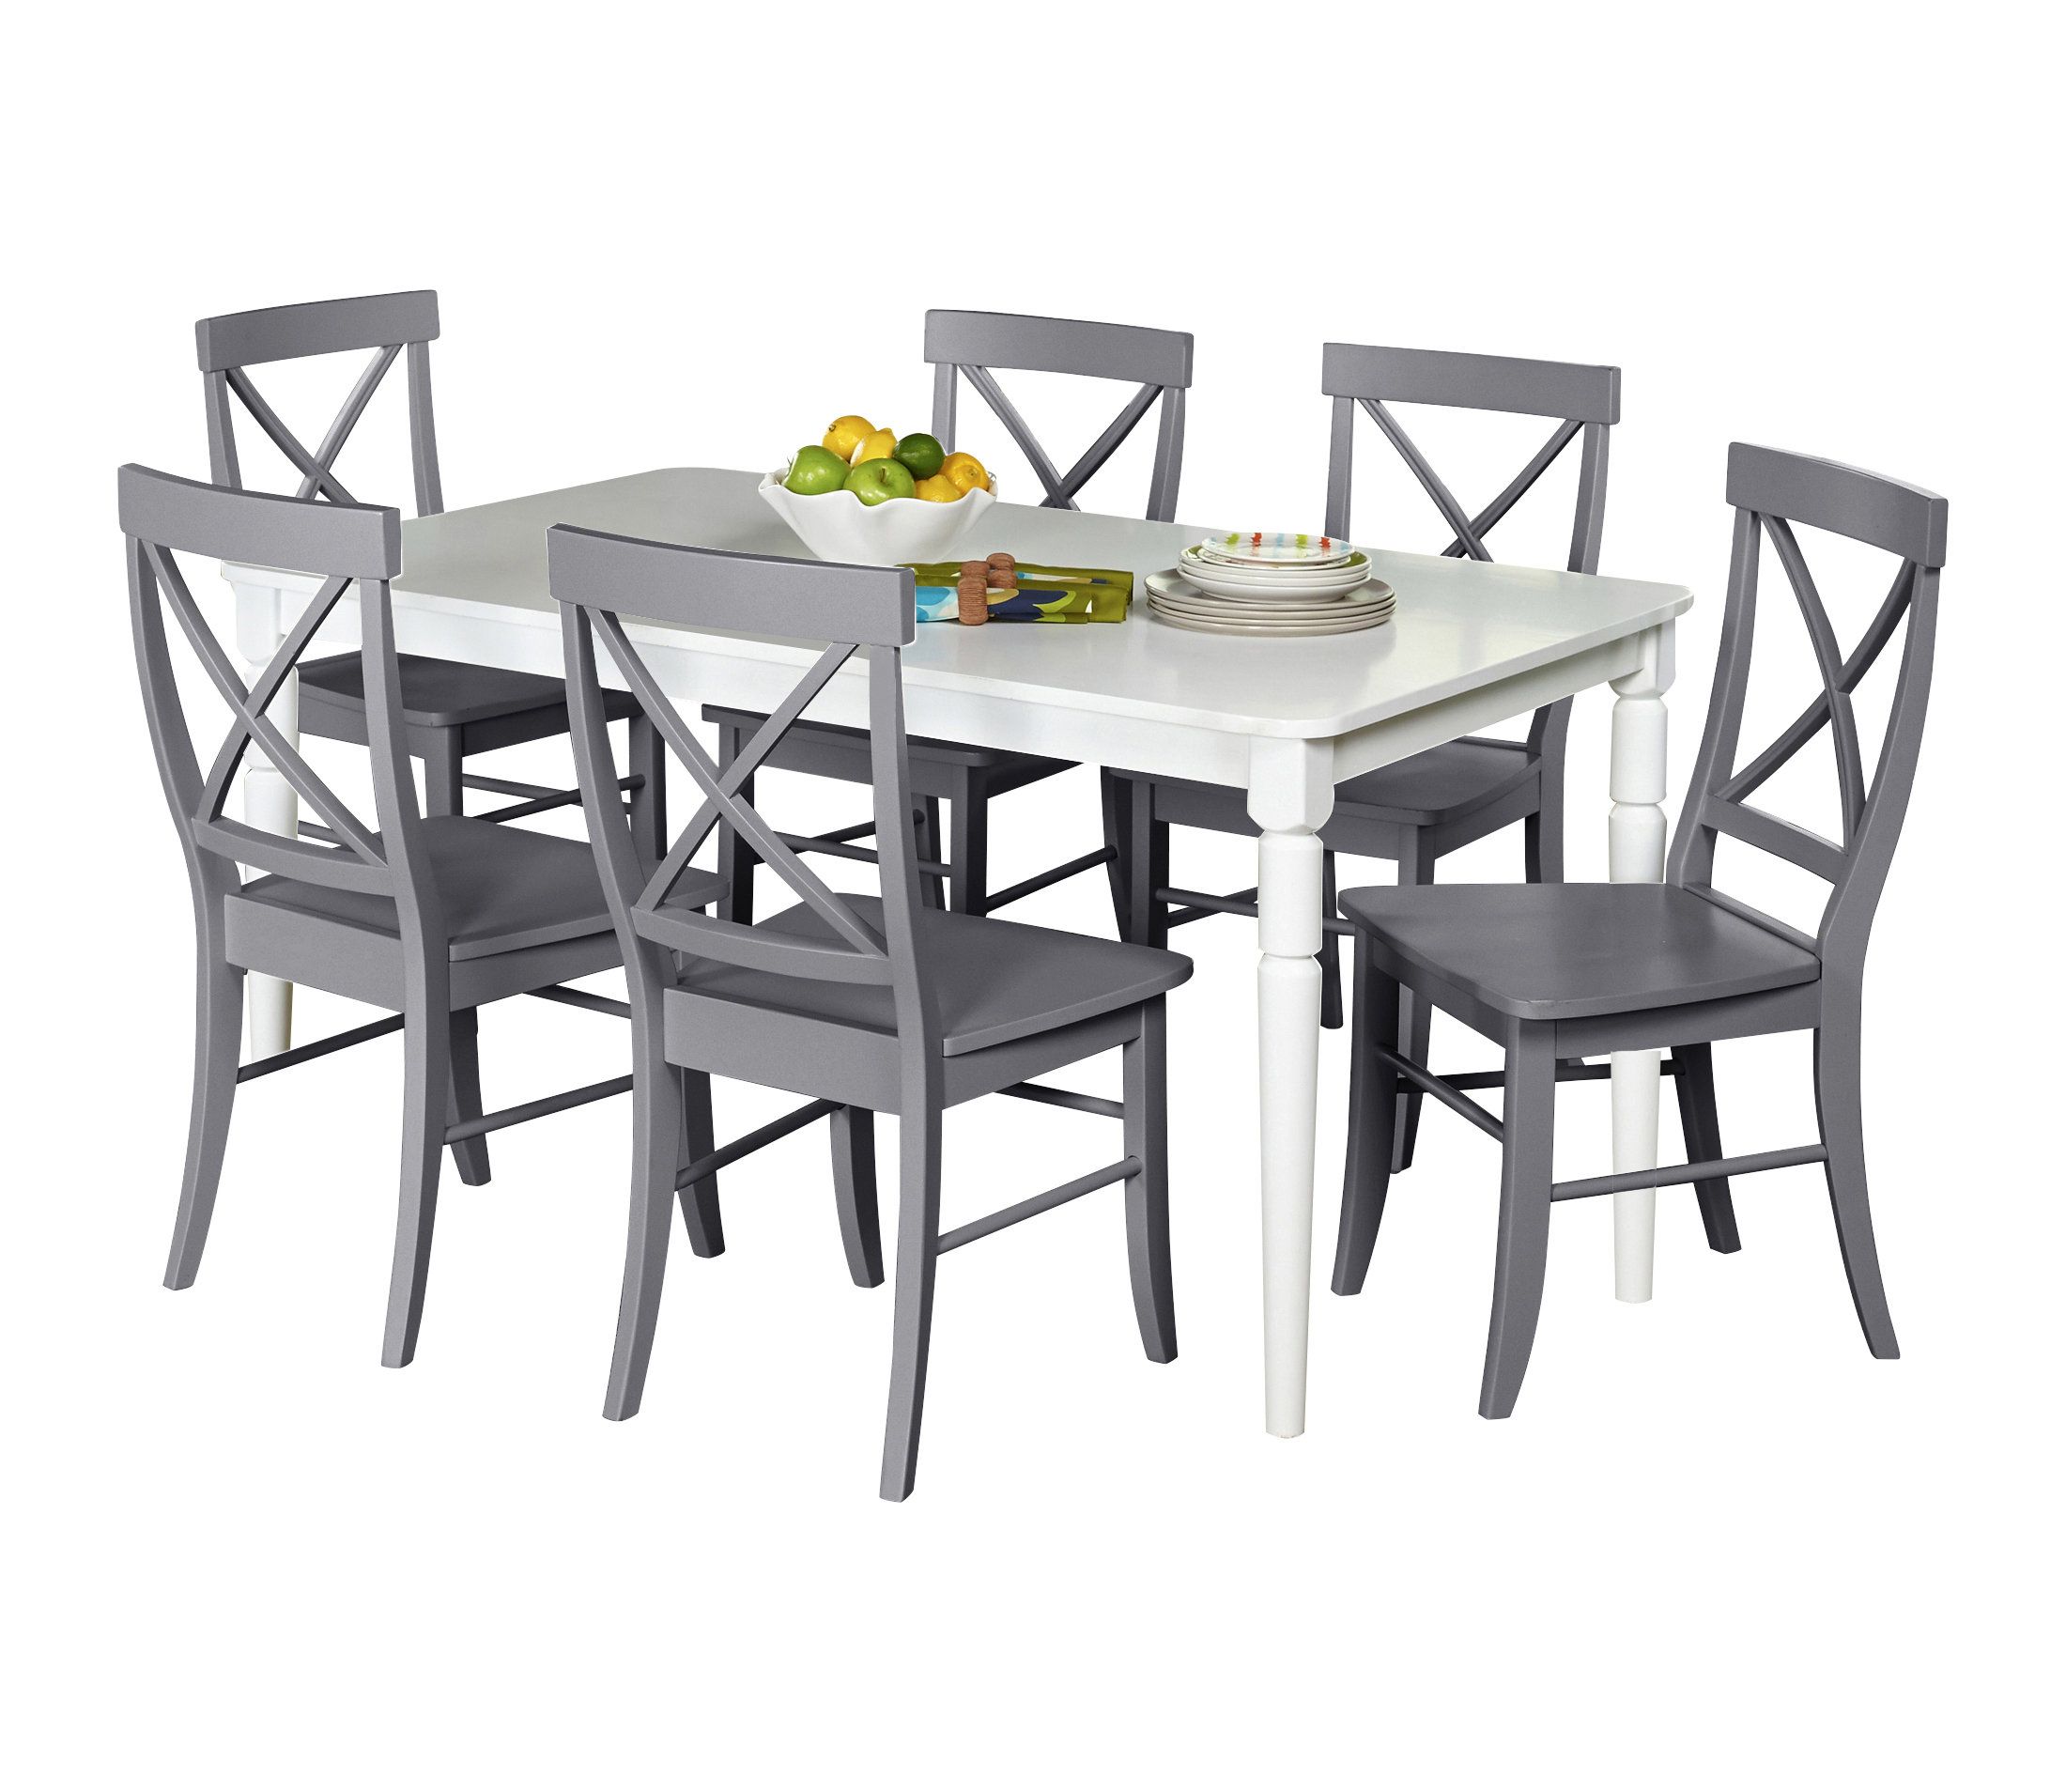 Beachcrest Home Brookwood 7 Piece Dining Set For Most Recently Released Baxton Studio Keitaro 5 Piece Dining Sets (View 15 of 20)